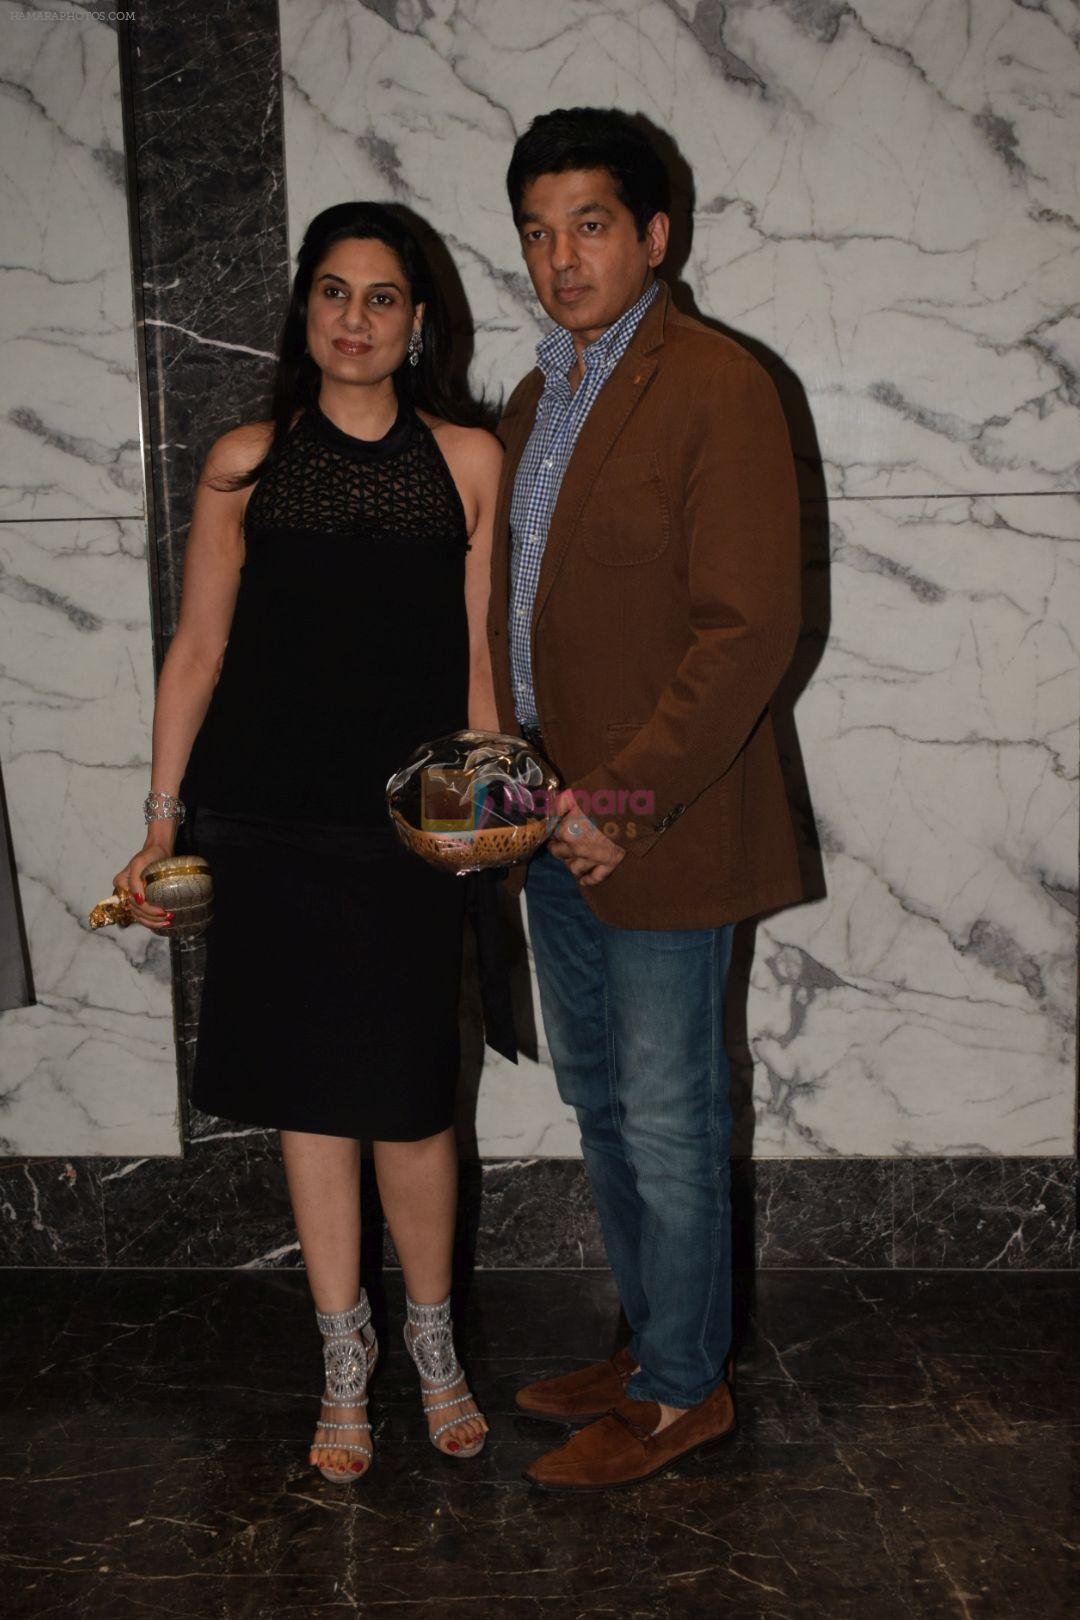 at Poonam dhillon birthday party in juhu on 18th April 2018